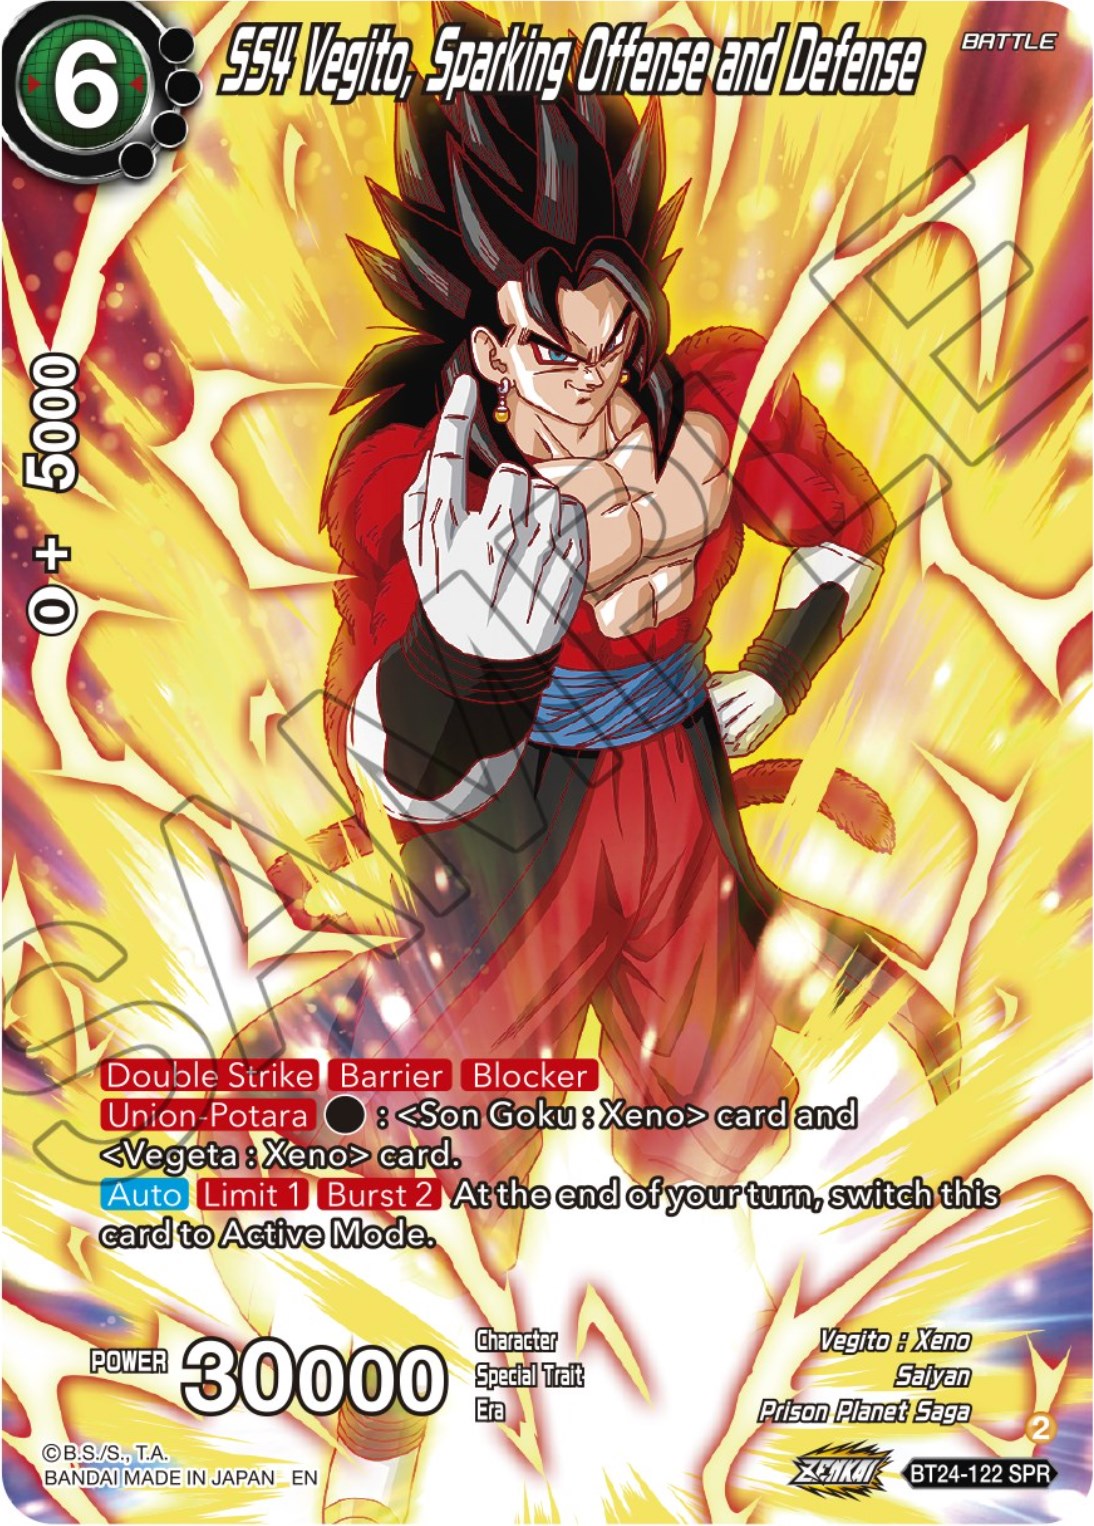 SS4 Vegito, Sparking Offense and Defense (SPR) (BT24-122) [Beyond Generations] | Red Riot Games CA